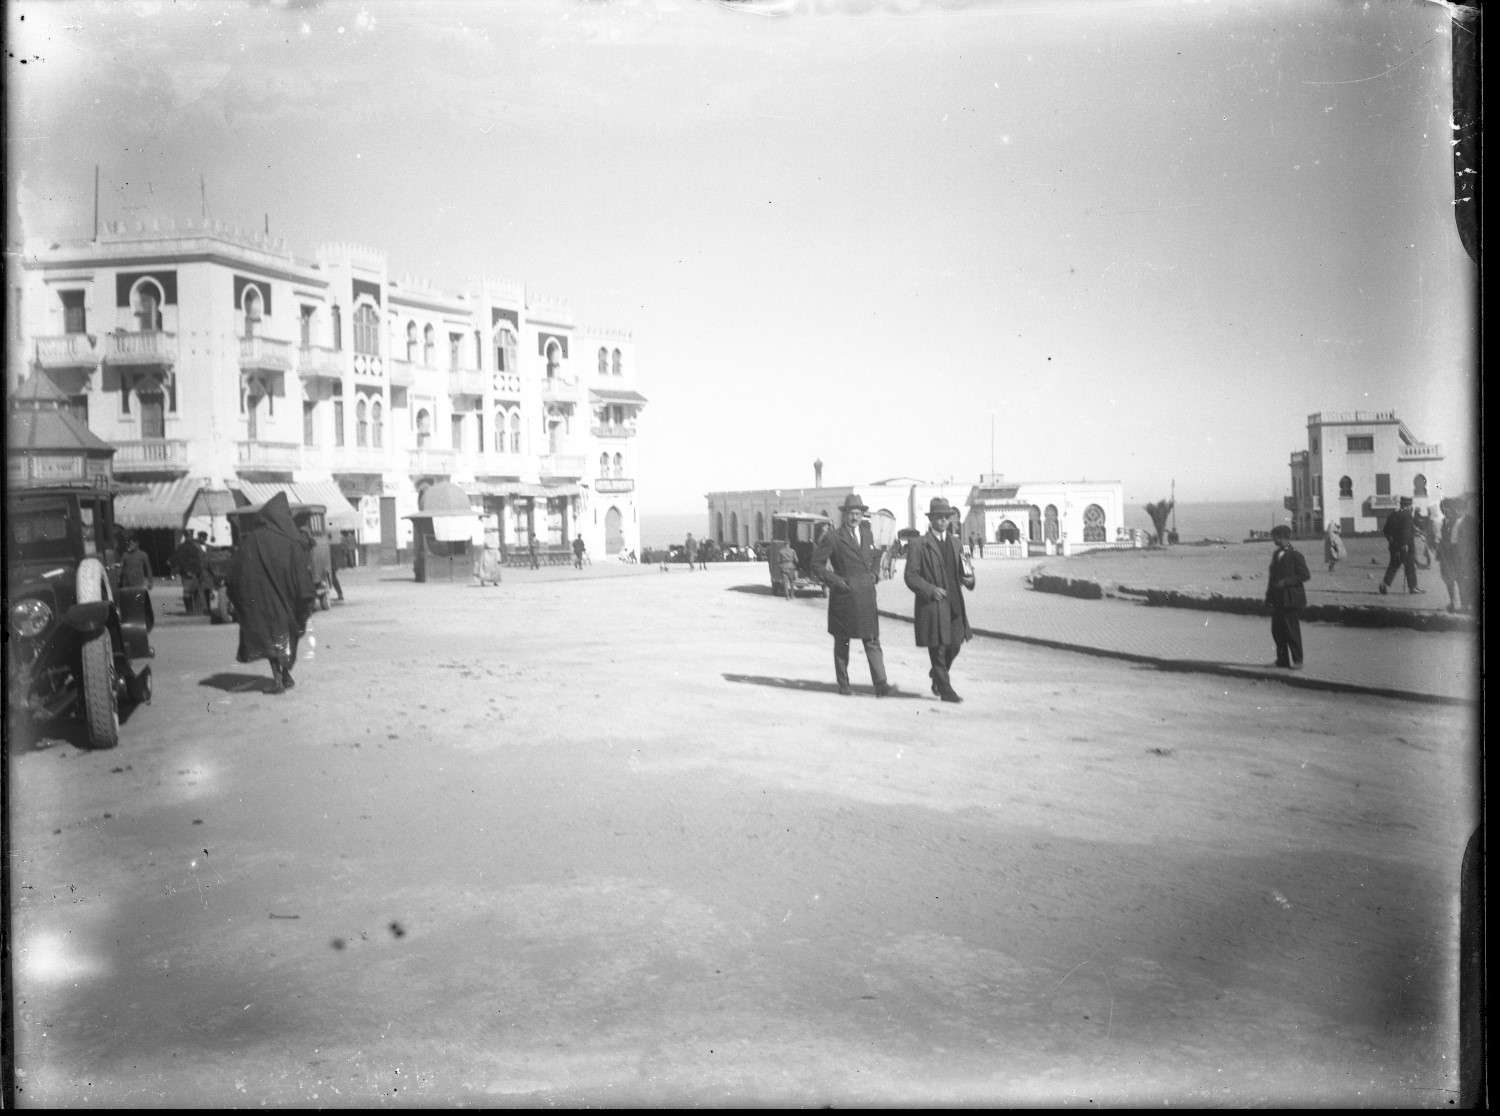 People in European and traditional dress walking in the Place de la Liberation, with the Oued Loukos in the background.
